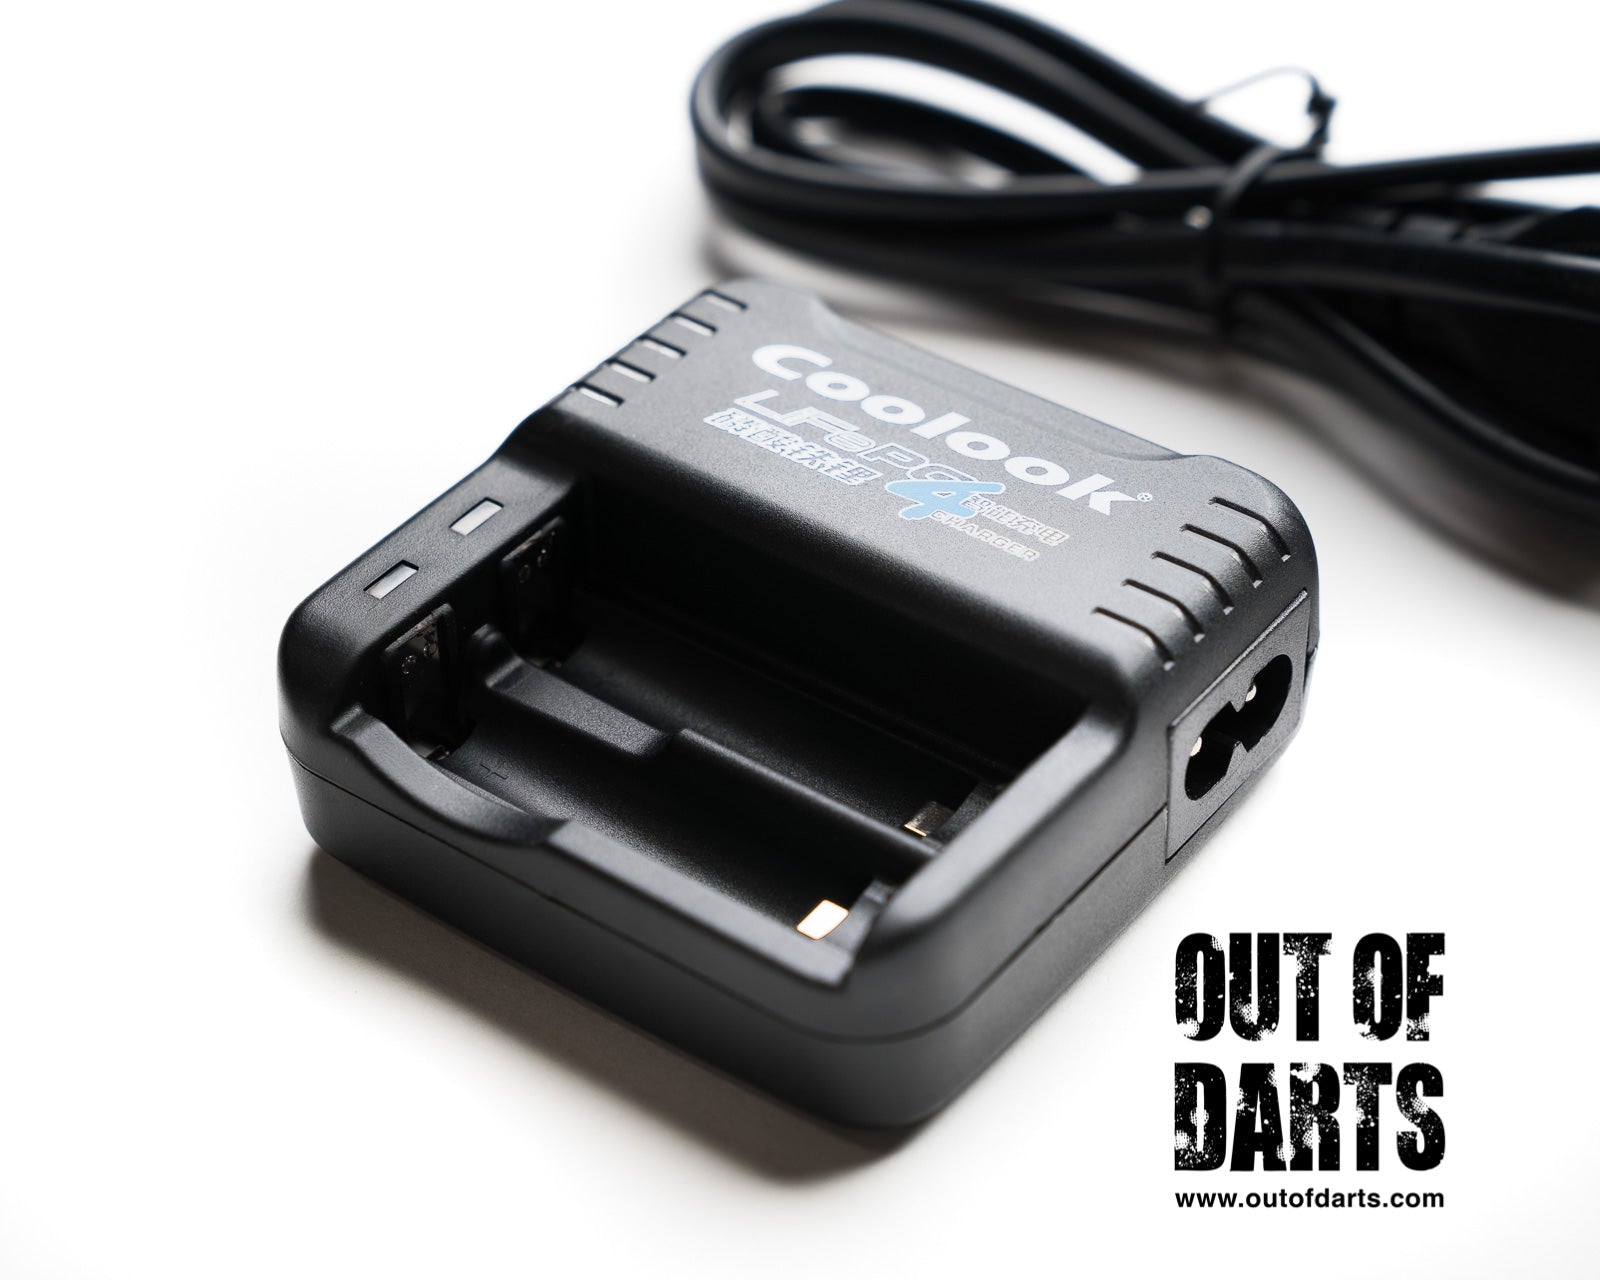 Nerf mod Coollook IMR Charger 14500 (basic IMR charger) - Out of Darts